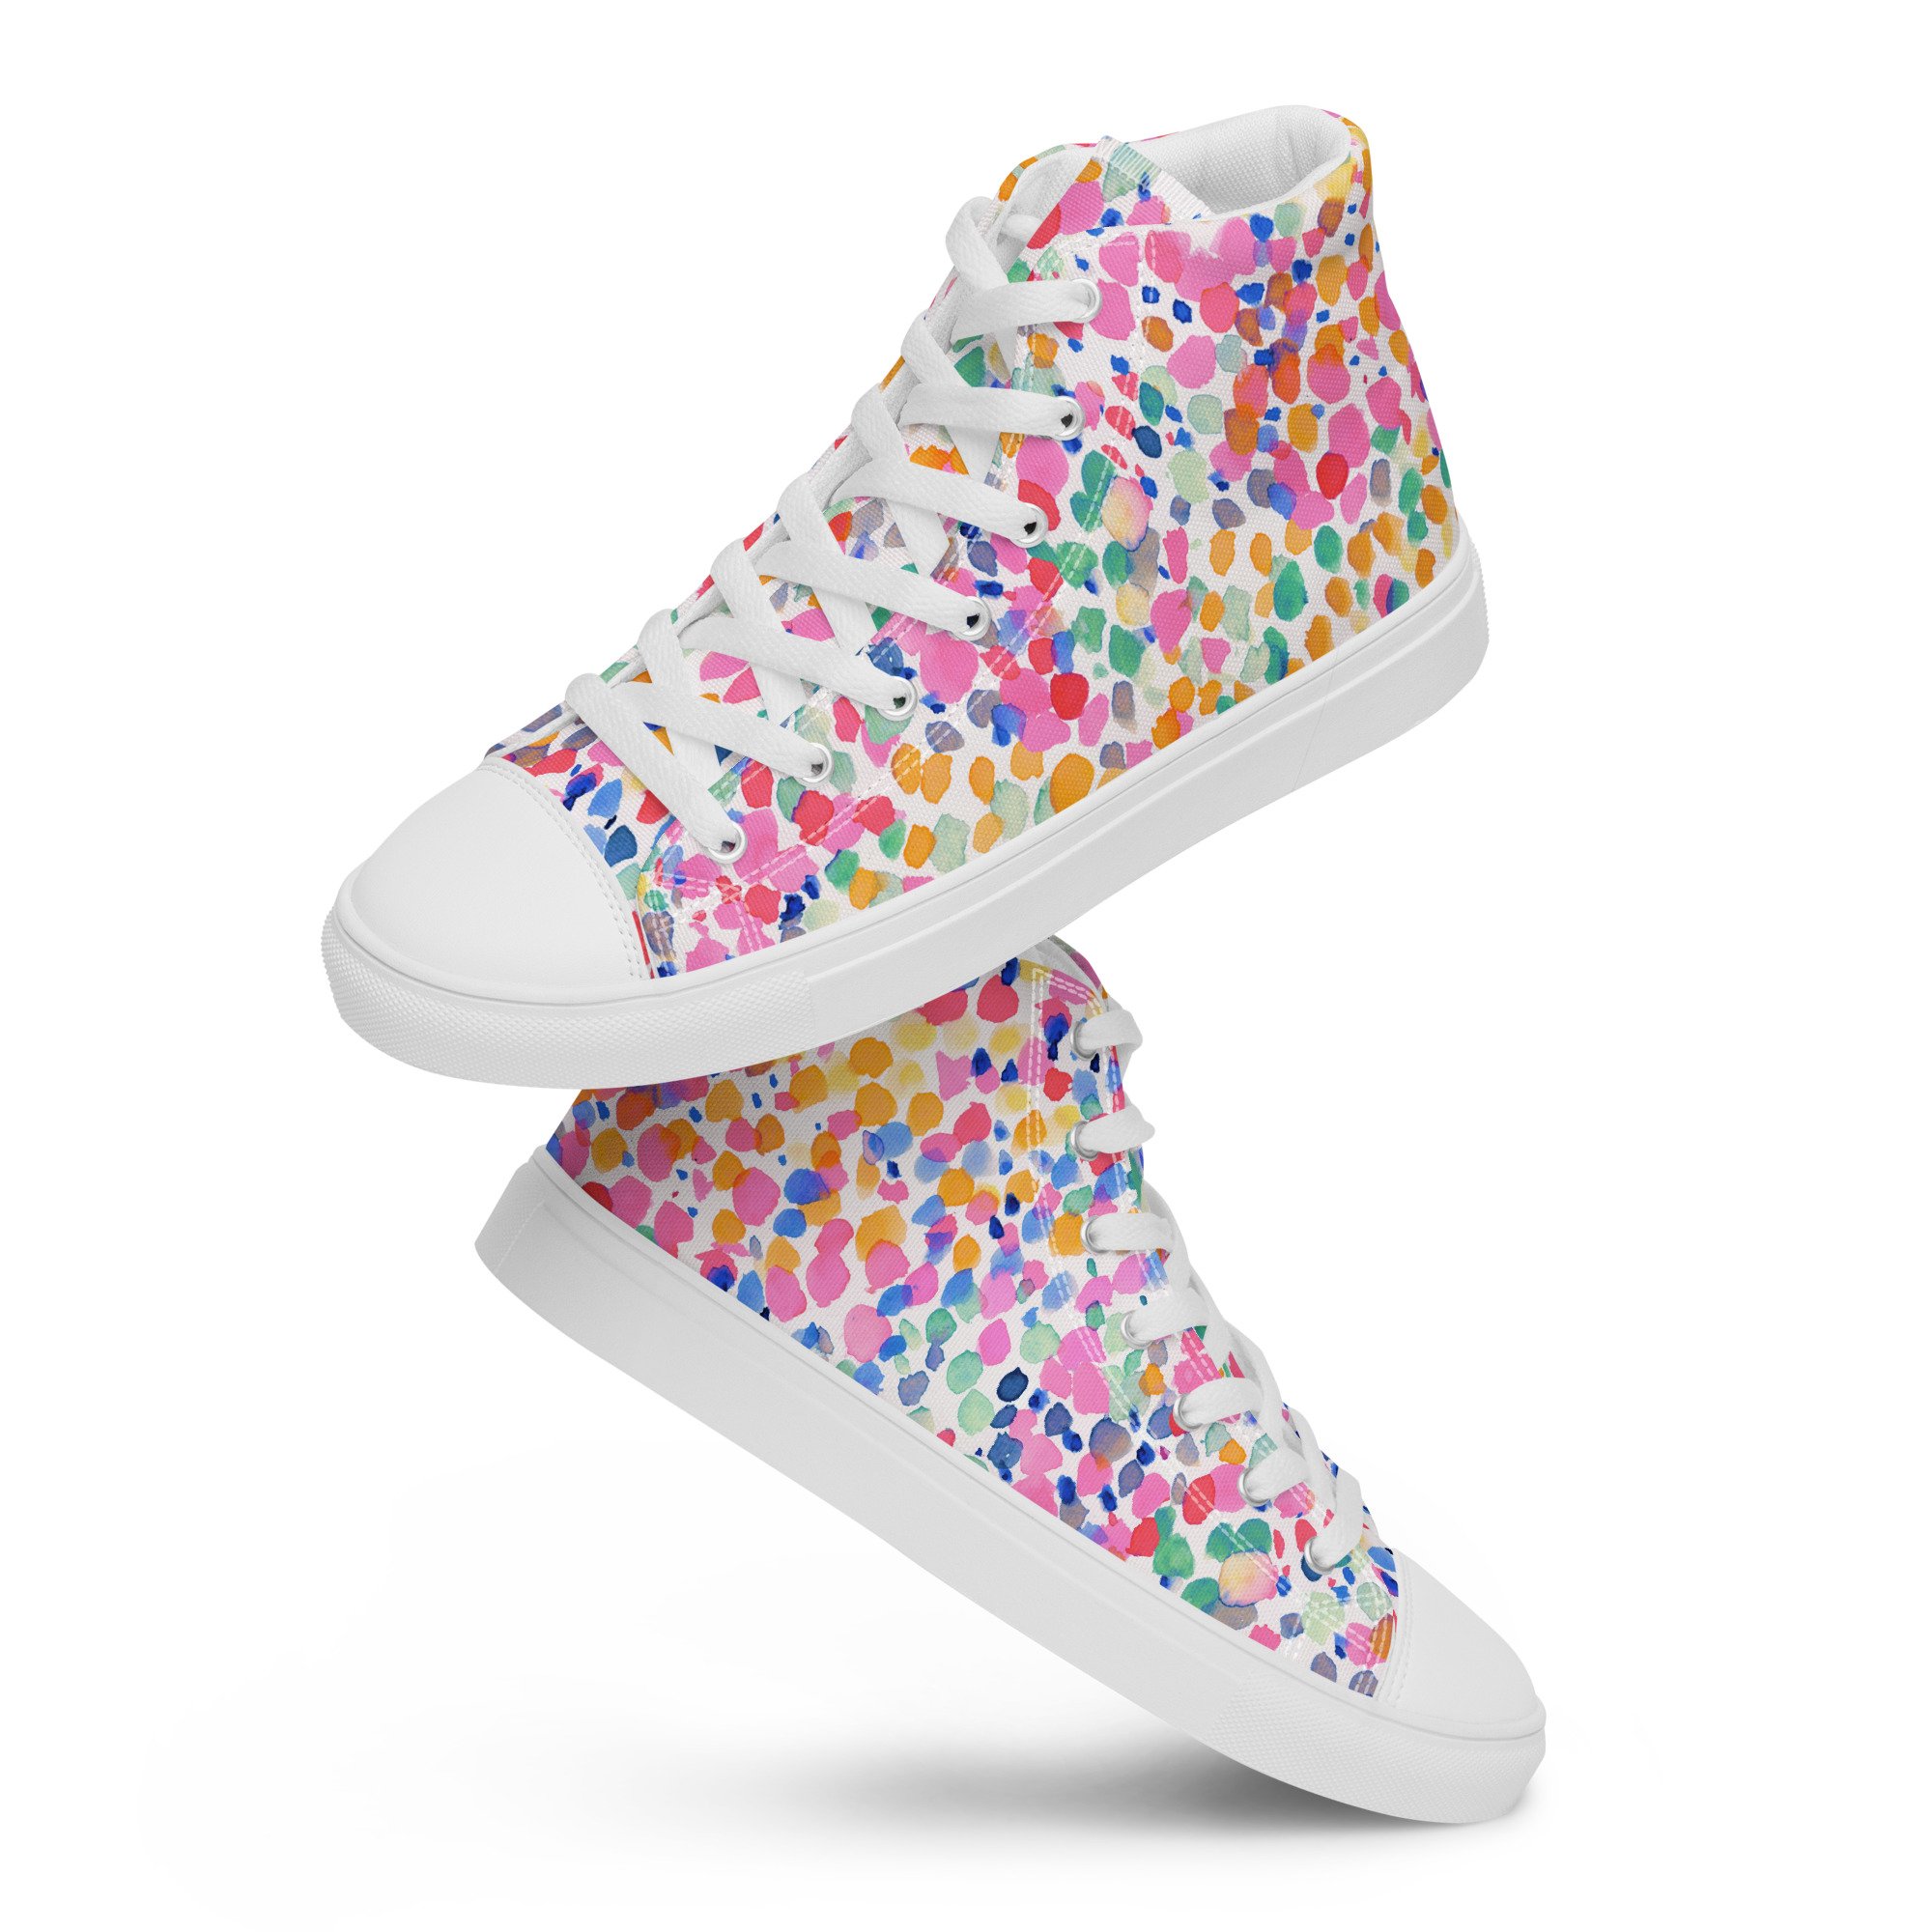 Pink Purple Blue Pastel Color Candies High Top Lace Up Sneakers Boots Shoes